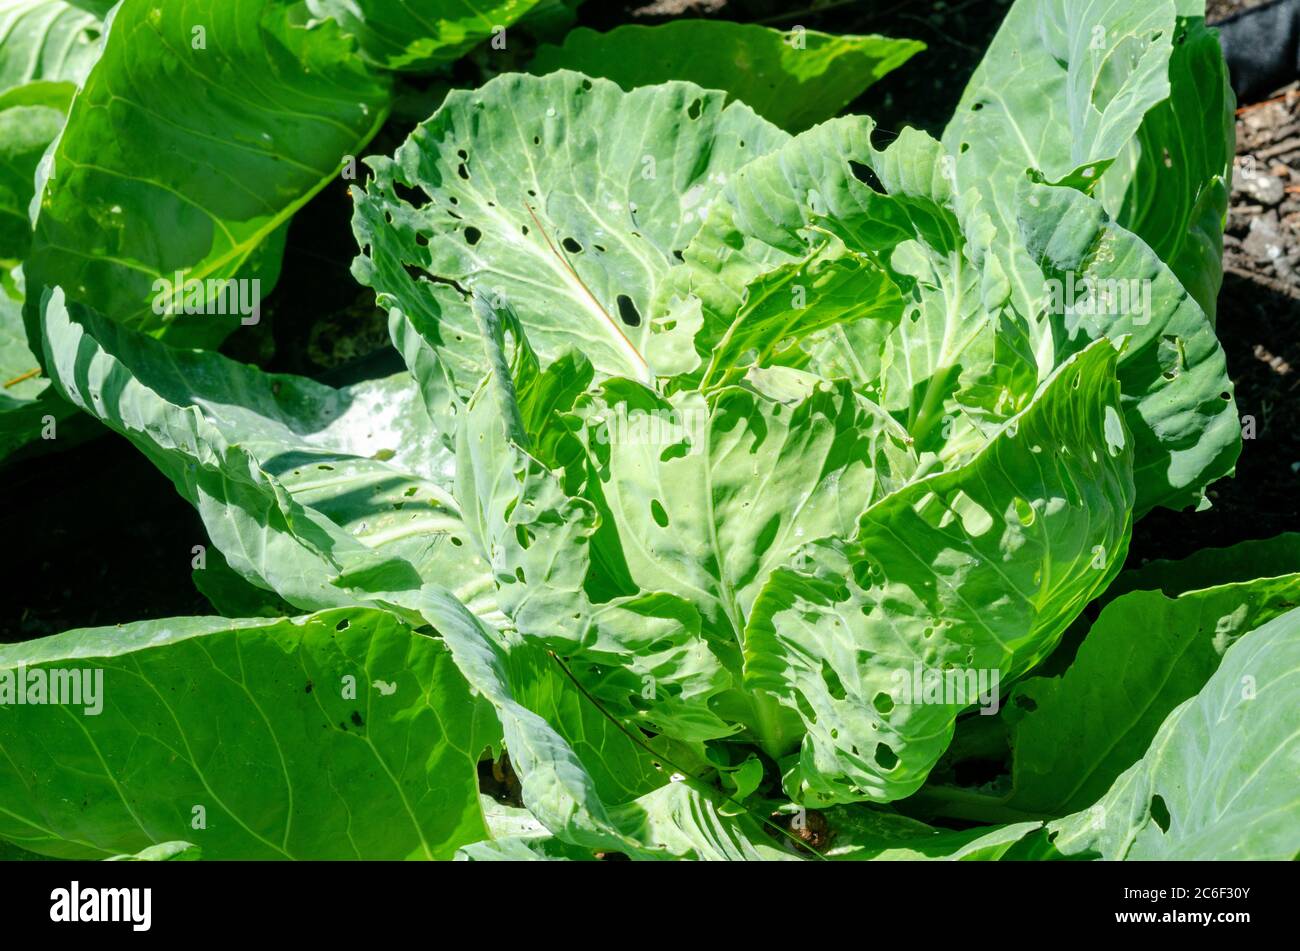 Cabbage plant, Brassica oleracea,  growing in garden using only organic no pesticide methods showing damage from cabbage looper  worms & other insect Stock Photo